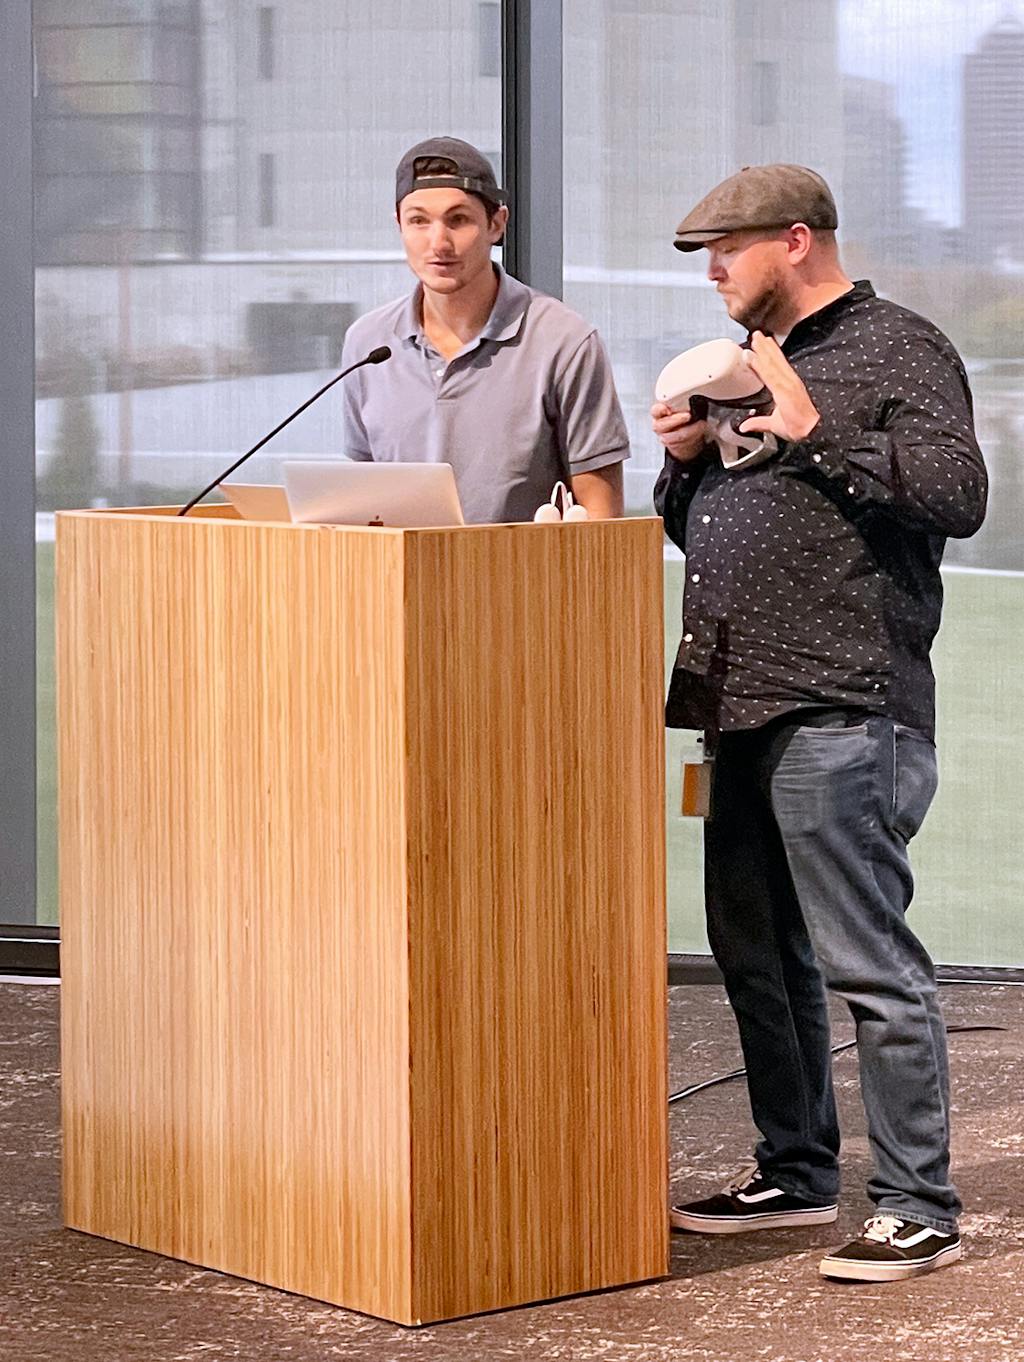 Two employees pitch their ideas during CoverMyMeds' Innovation Days event, an annual event focused on innovation in healthcare